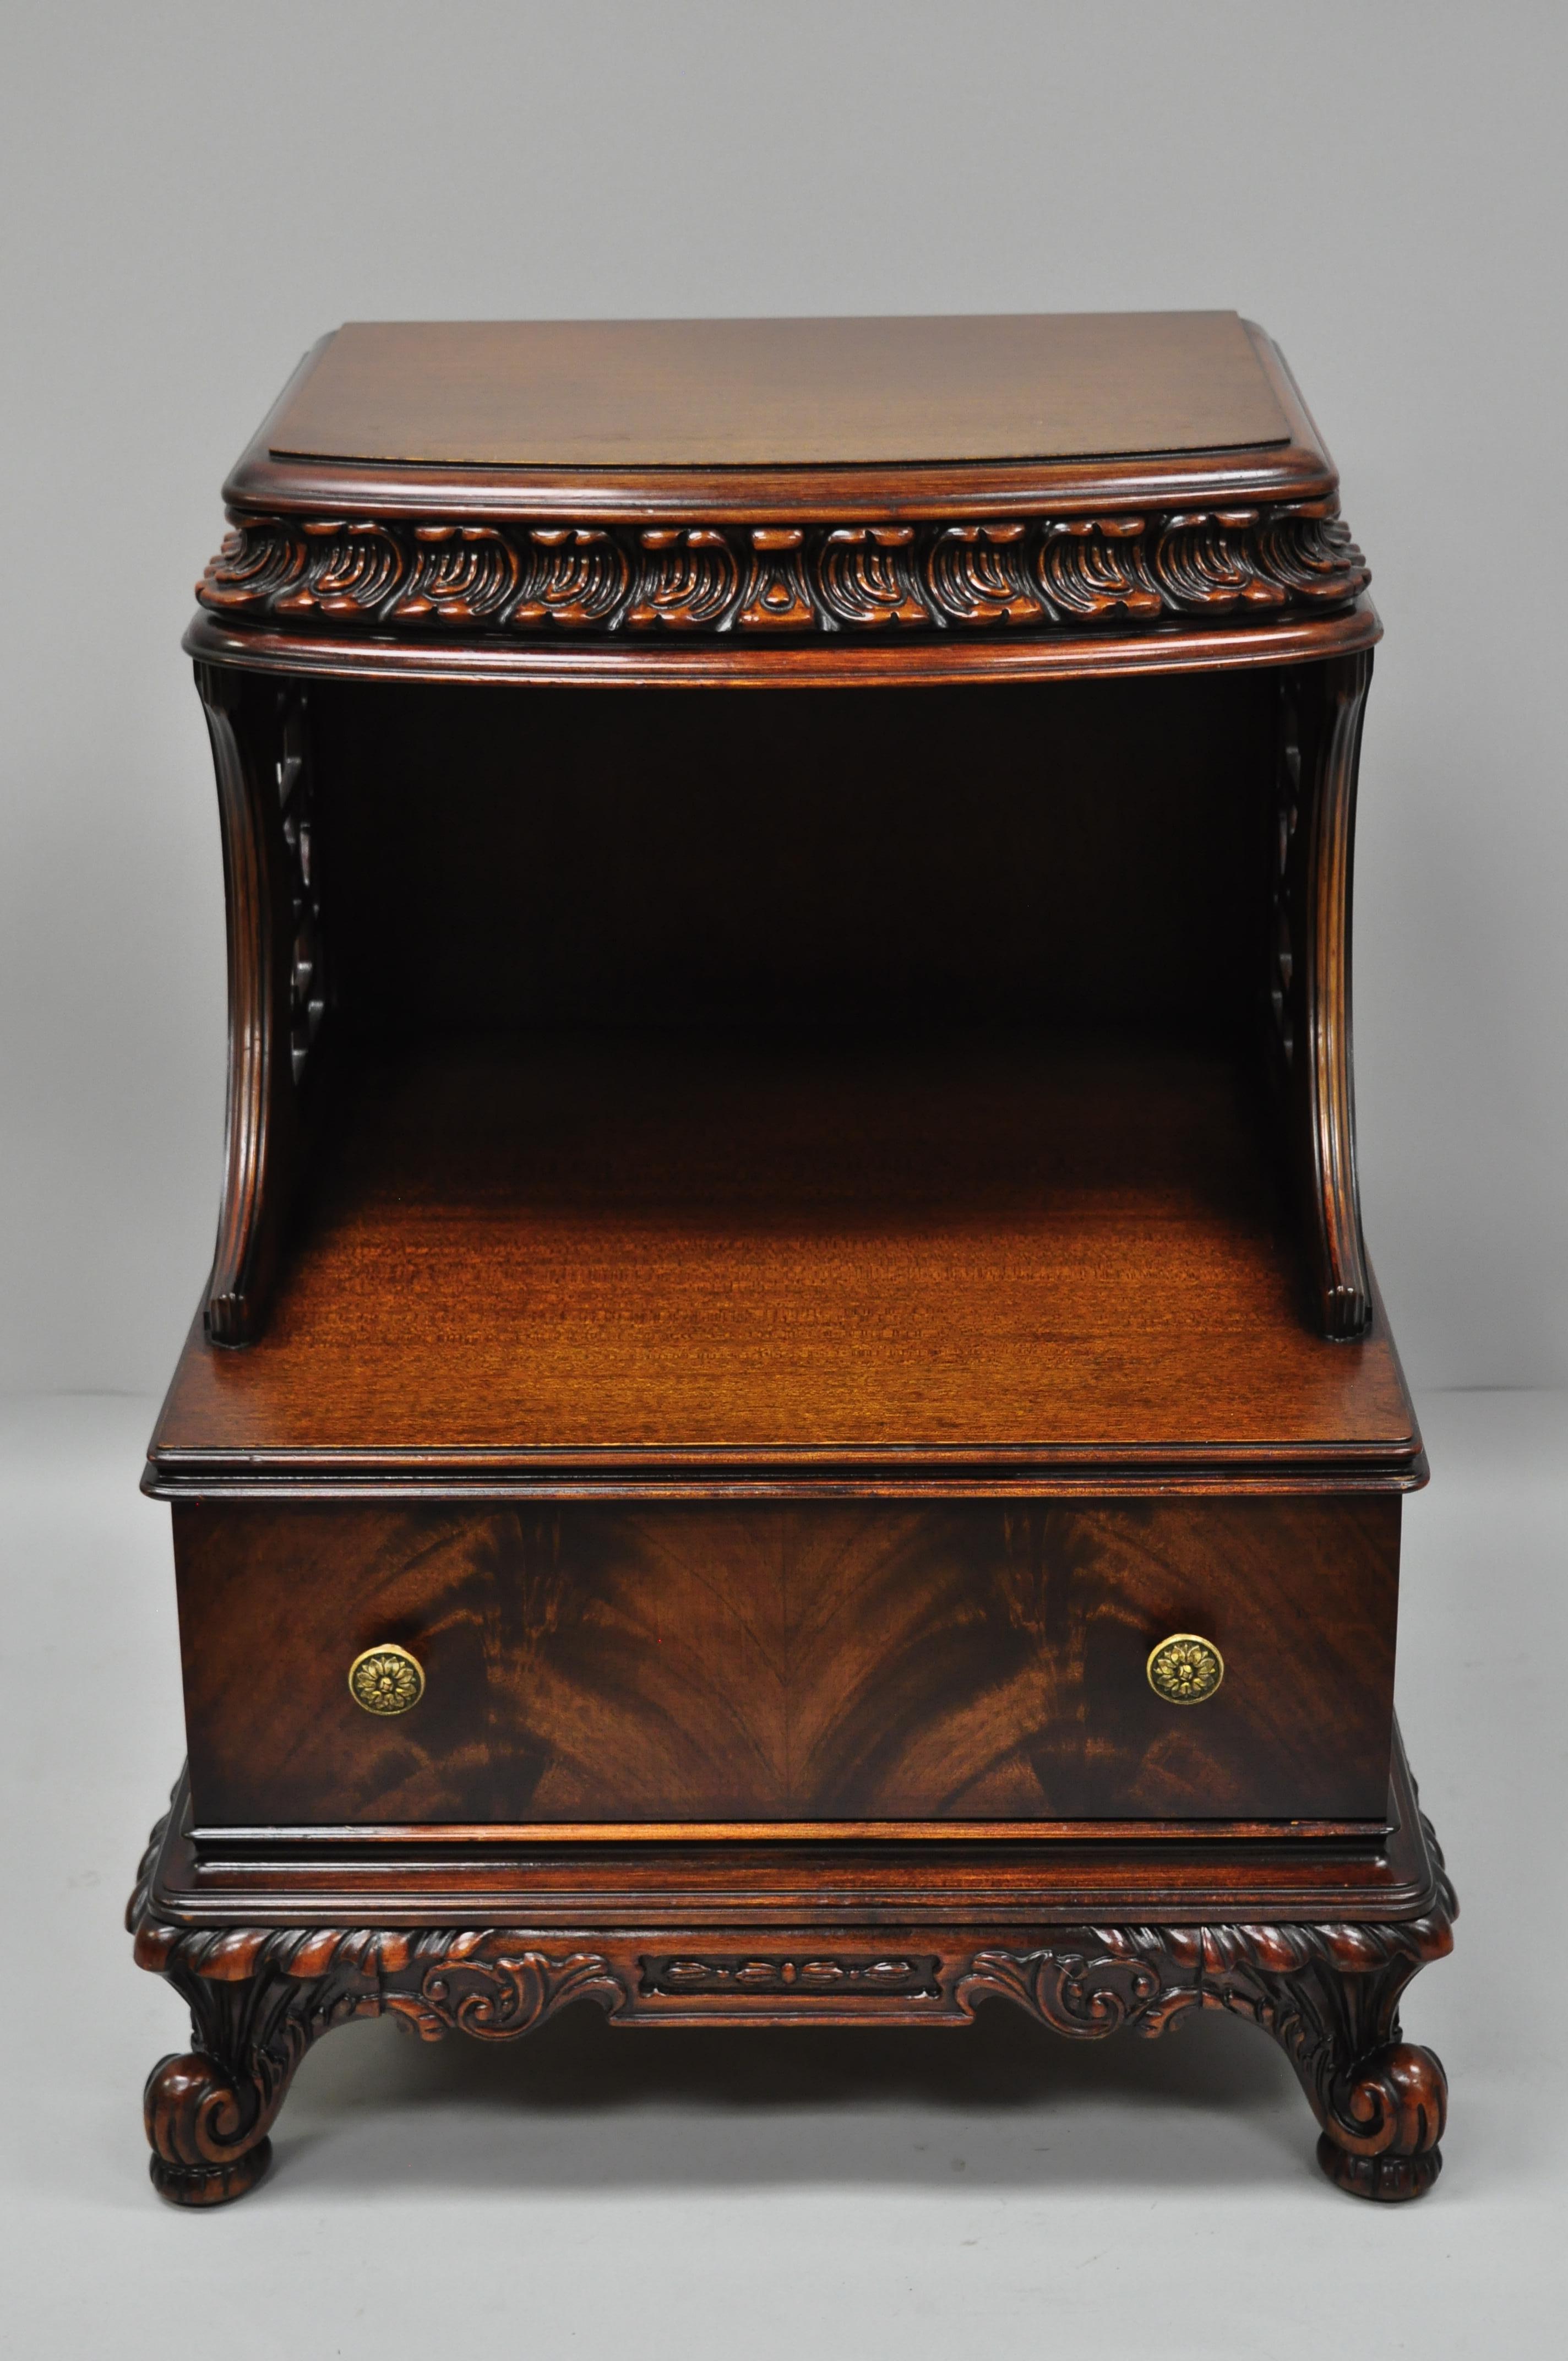 Antique Chinese Chippendale flame mahogany step down nightstand side table. Item features lattice cutout sides, ornately carved border, beautiful wood grain, cabriole legs, and quality American craftsmanship, circa early to mid-20th century.